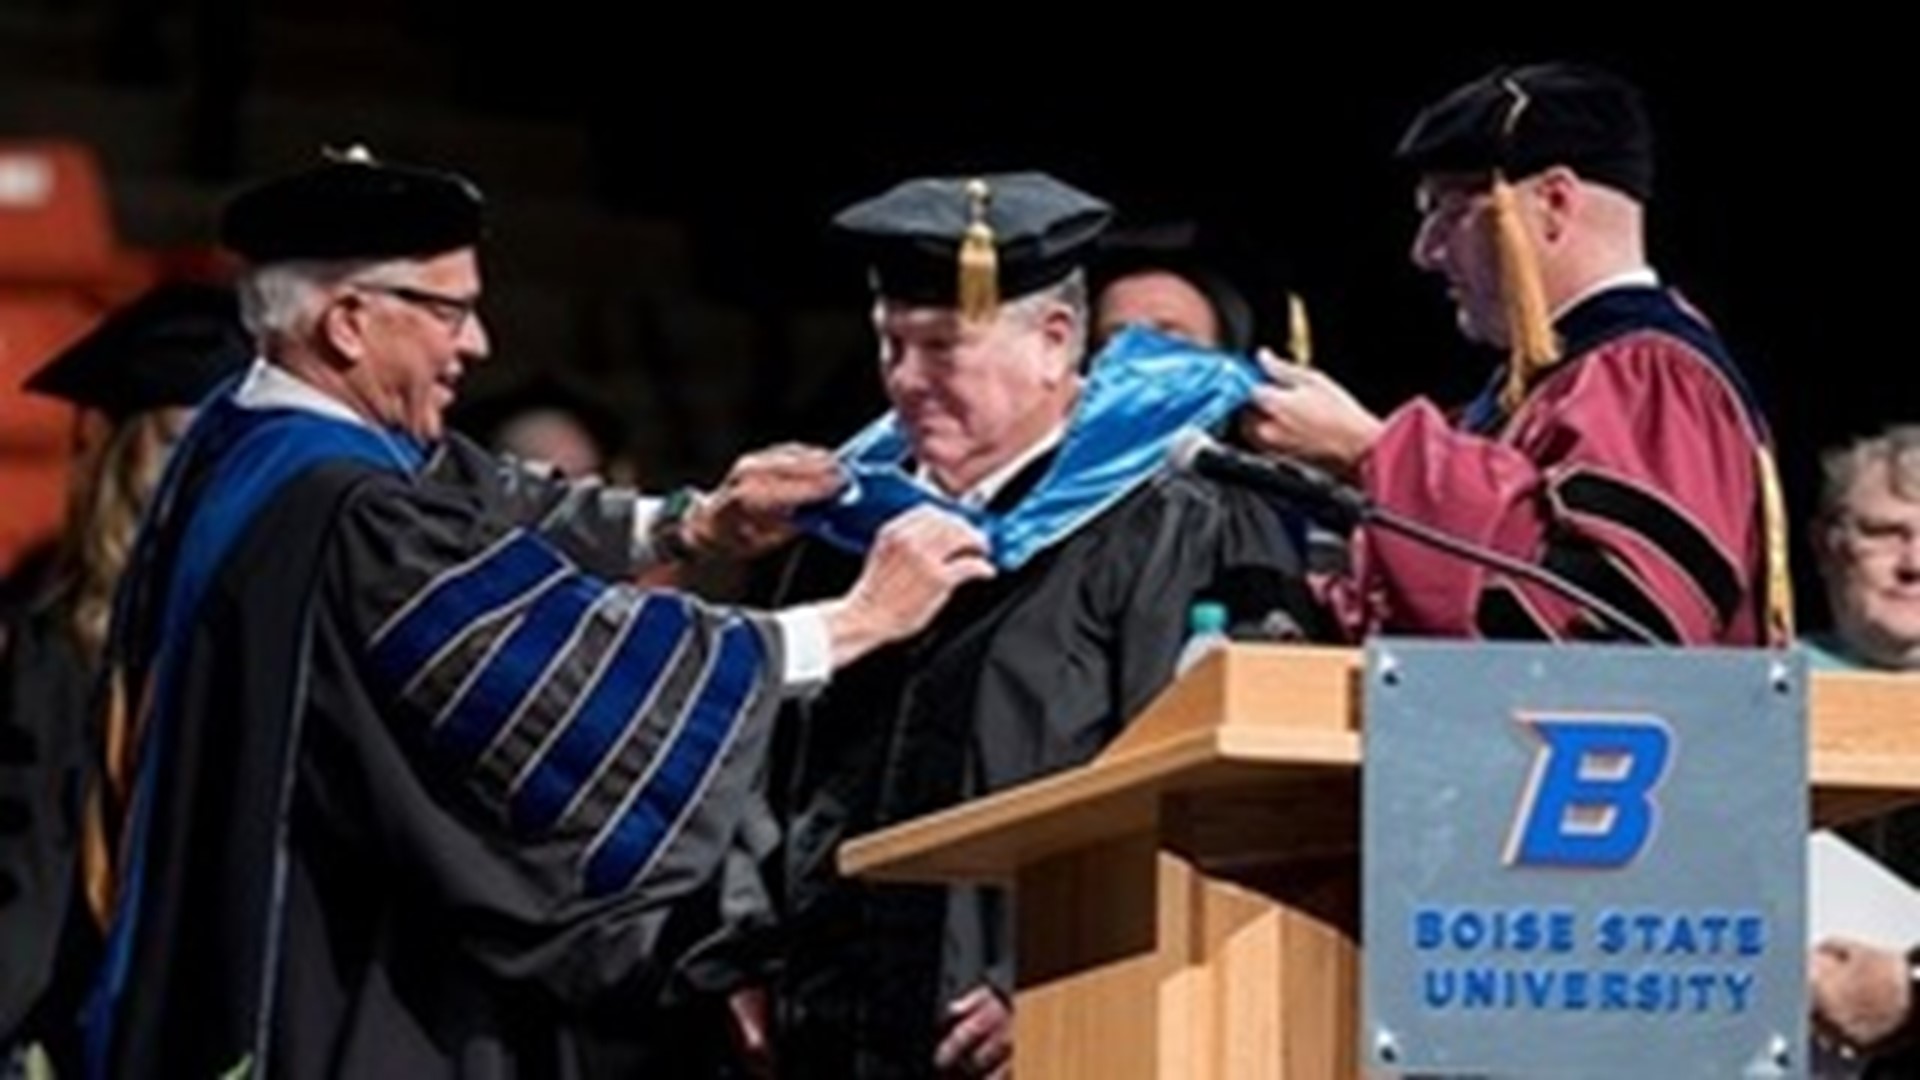 Boise State celebrates recordbreaking commencement